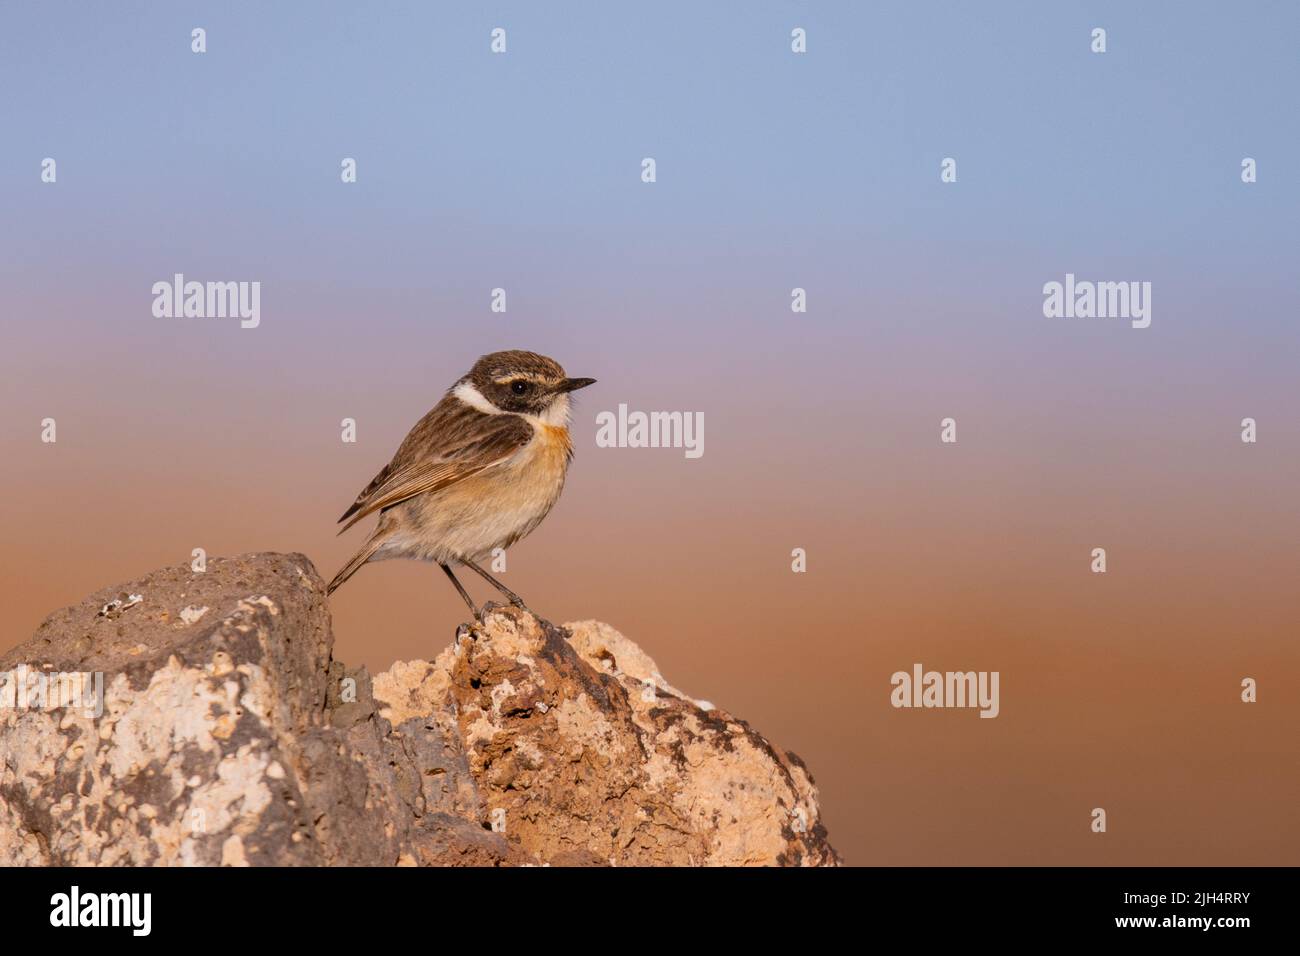 Canary islands chat, Saxicola dacotiae, perching on a stone, side view, Canary Islands, Fuerteventura Stock Photo